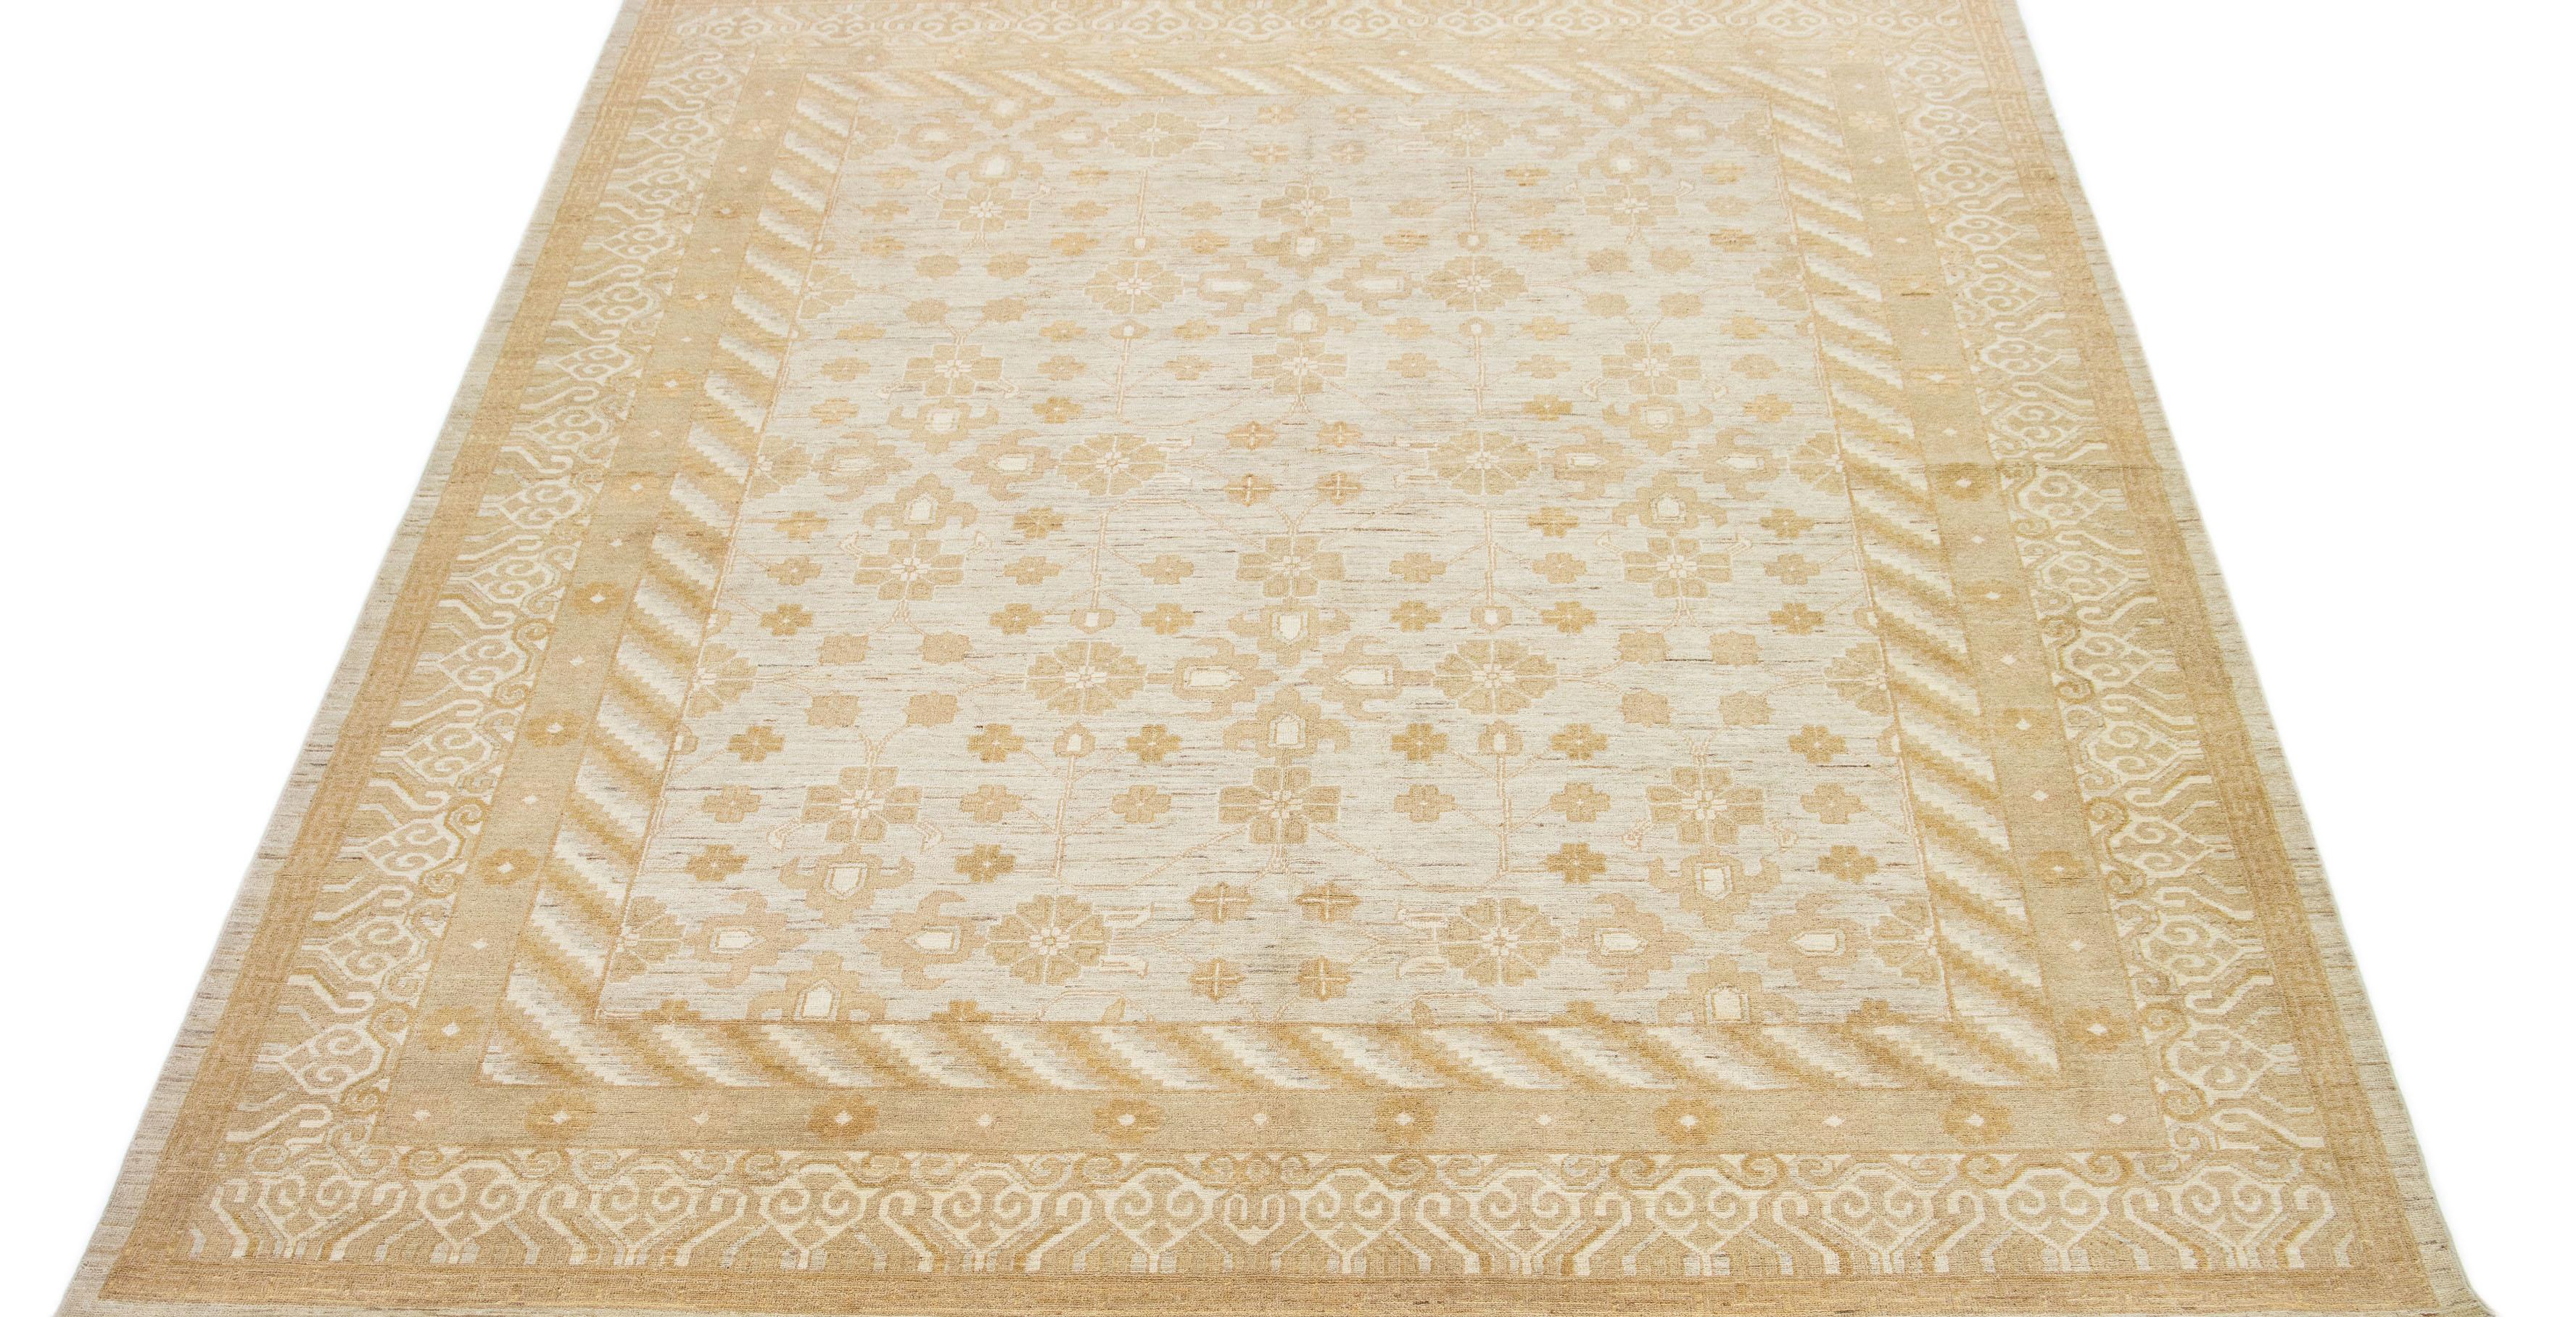 Beautiful Paki Peshawar hand-knotted wool rug with a gray color field. This modern rug has beige and tan accents in a Classic all-over floral motif.

This rug measures 9'1